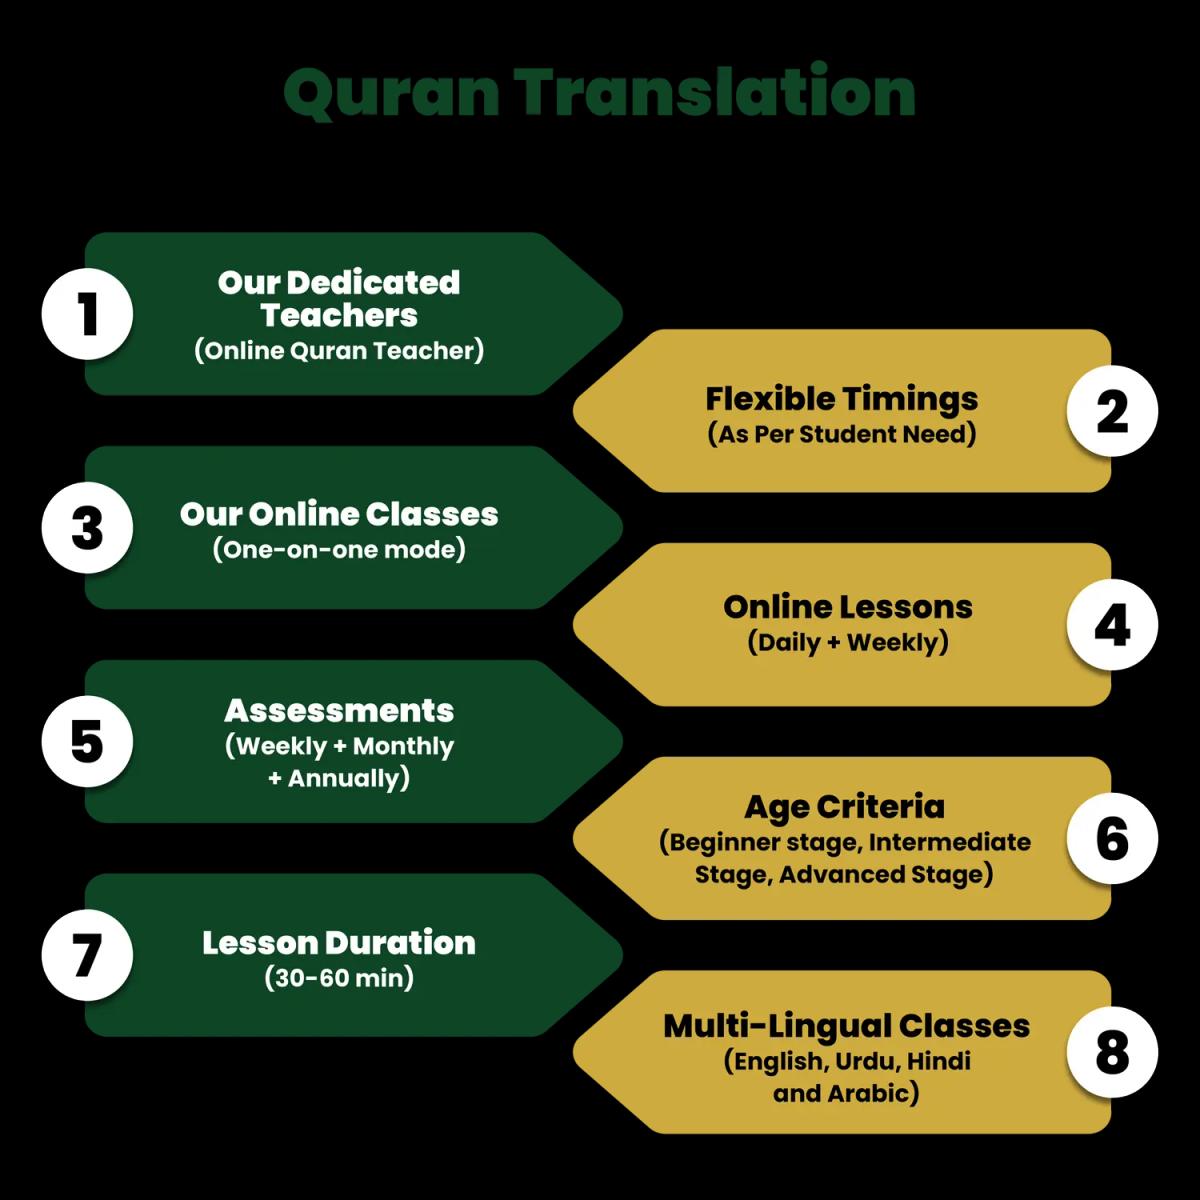 Quran Translation course features